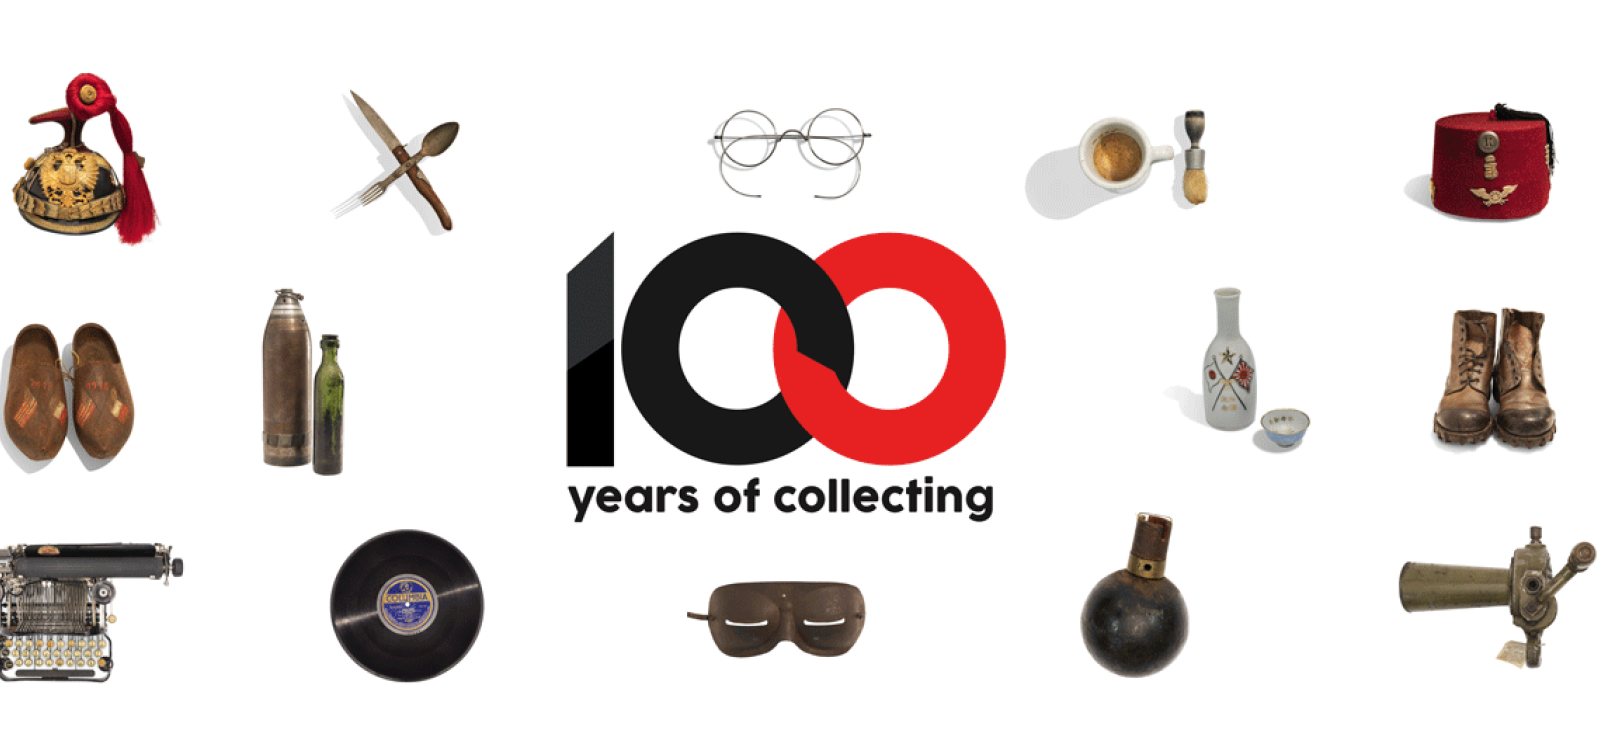 Collage of various WWI-era artifacts. Text: 100 Years of Collecting.